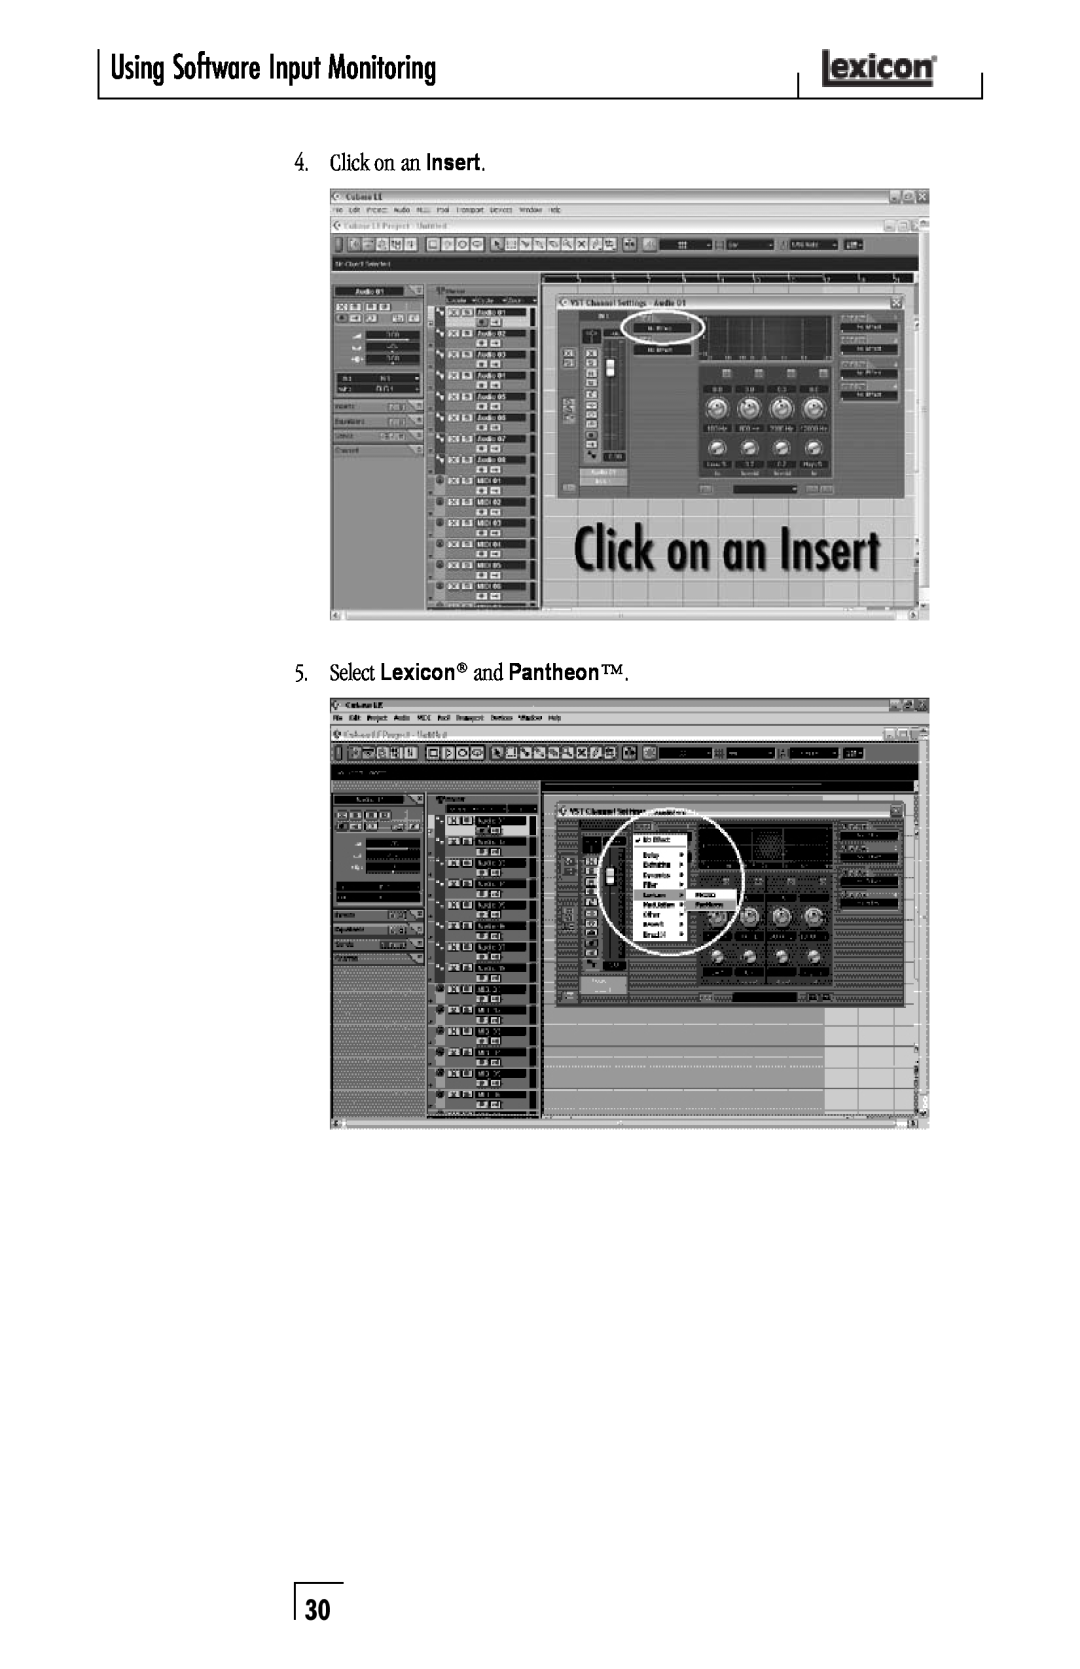 Lexicon Lambda Desktop Recording Studio Select Lexicon and Pantheon, Using Software Input Monitoring, Click on an Insert 